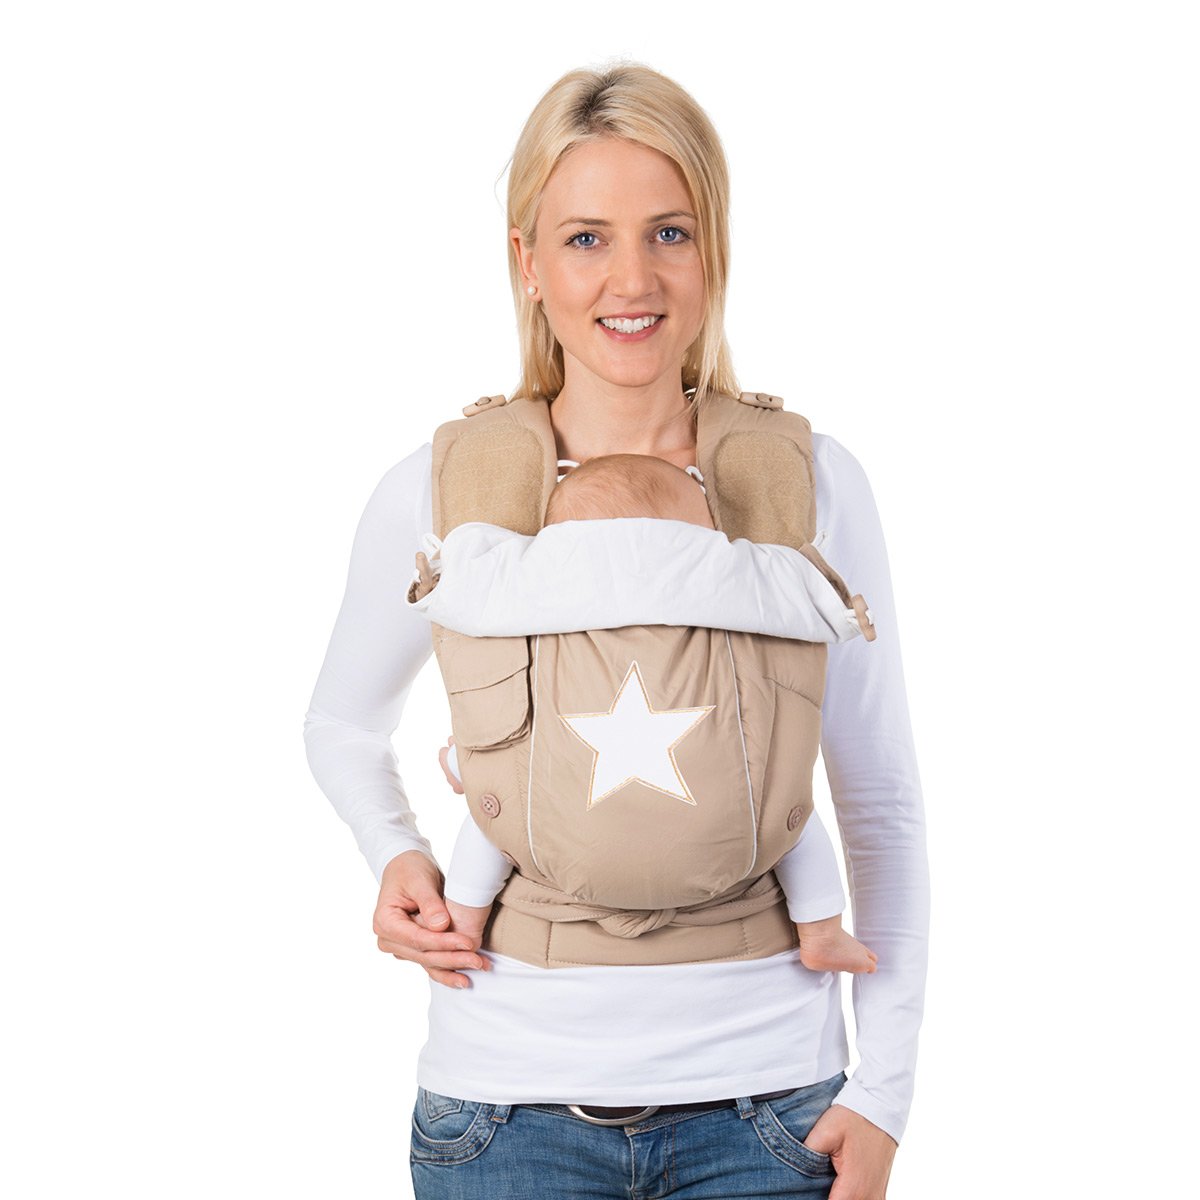 Bondolino Plus Baby Carrier With Tying Instructions  2016 2016